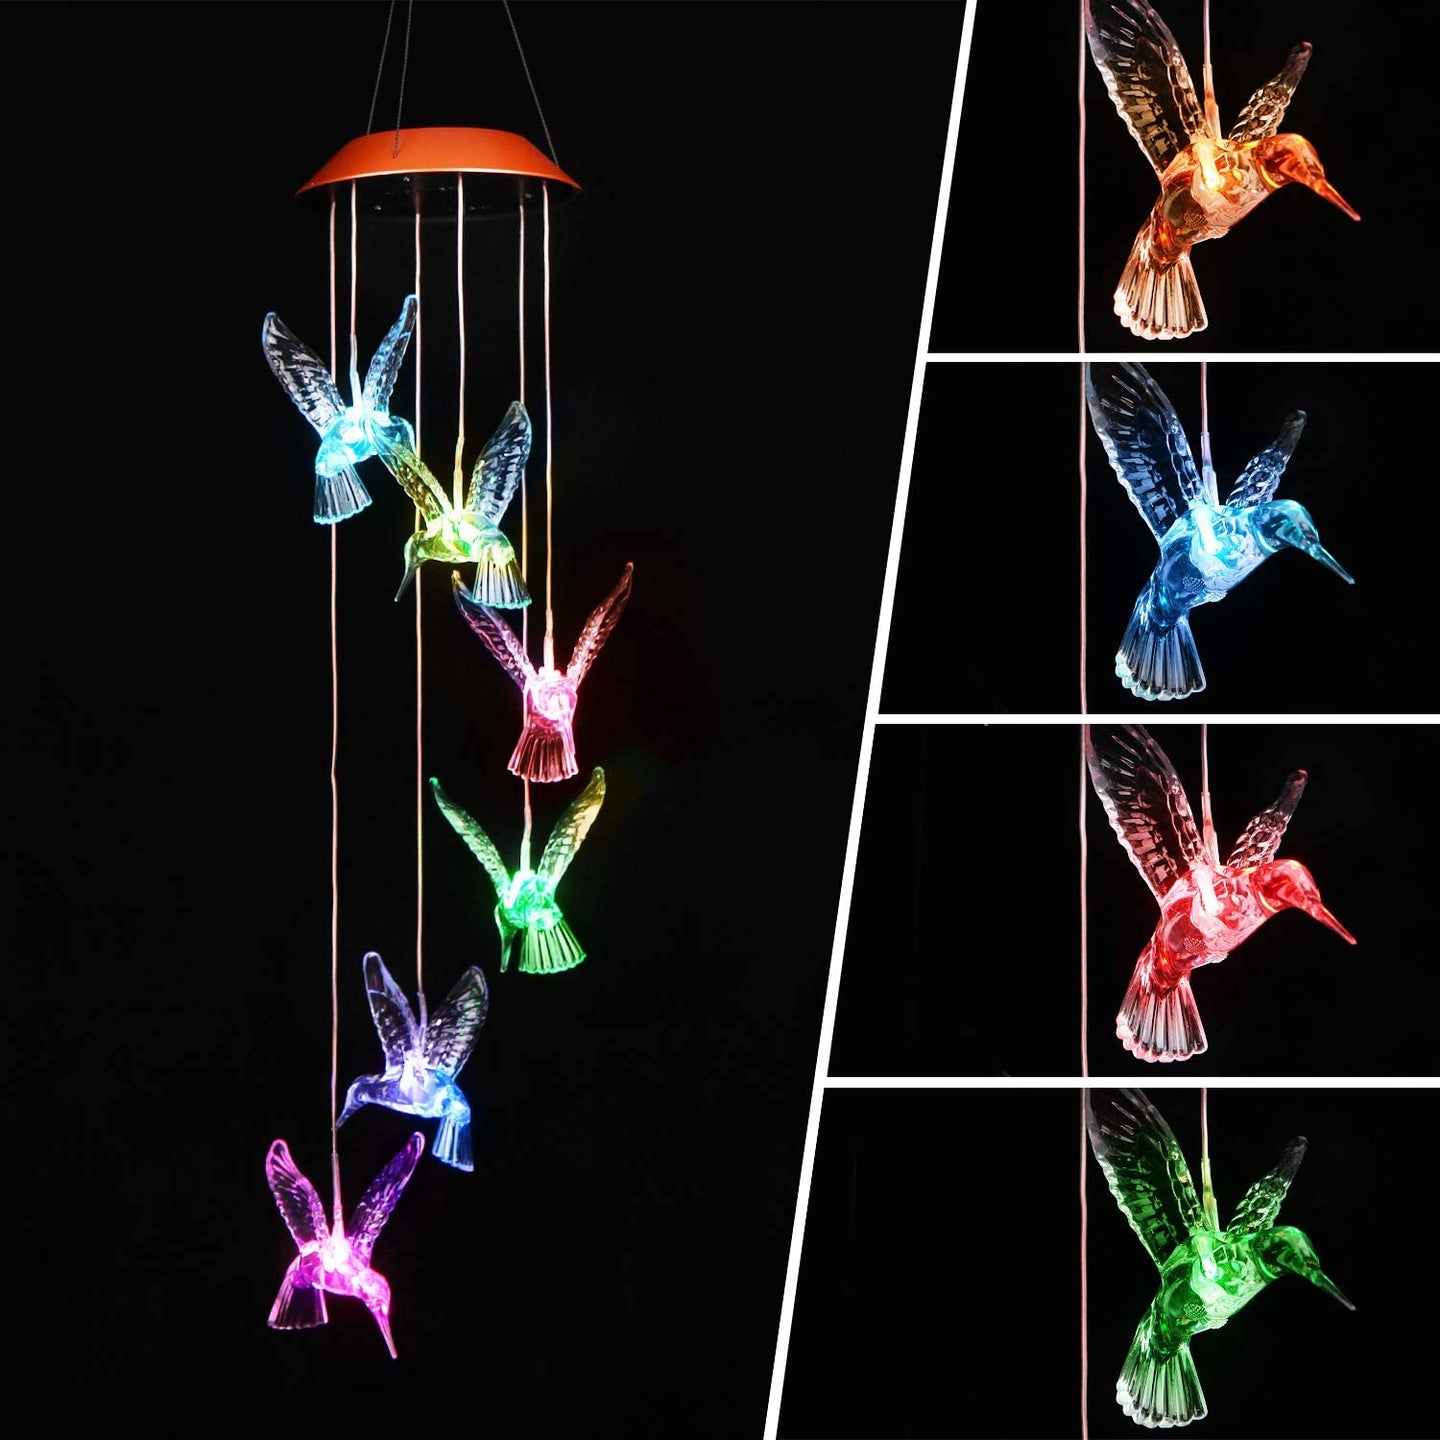 Solar Hummingbird Wind Chime Color Changing Lights Outdoor Solar Lights Hanging Decorative Garden Lights Xmas Gifts for Decor Home Garden Patio Yard Indoor Outdoor